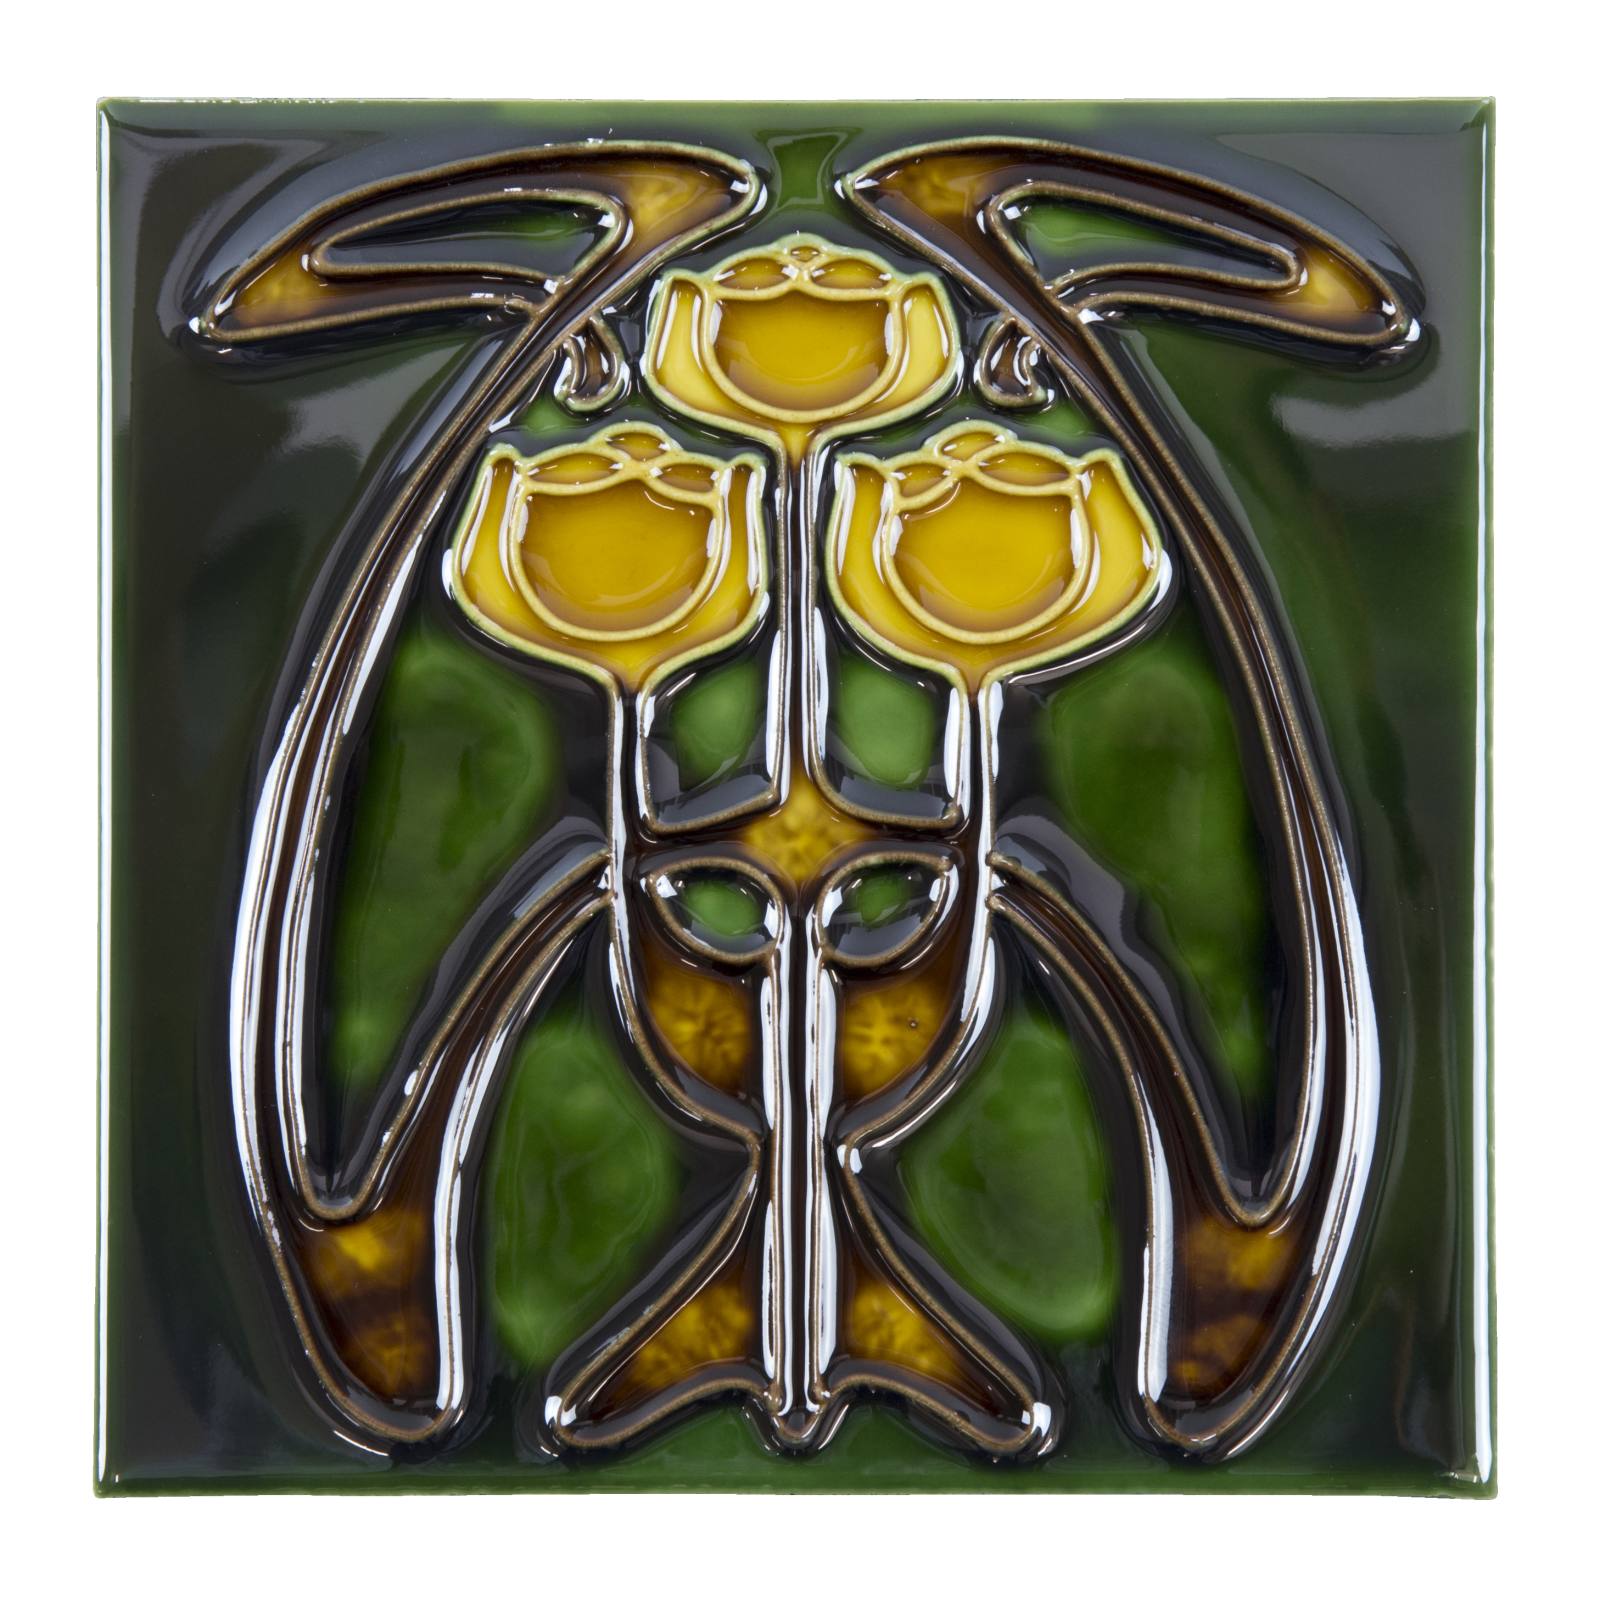 T44B Floral Tile 6x6, Yellow on Green